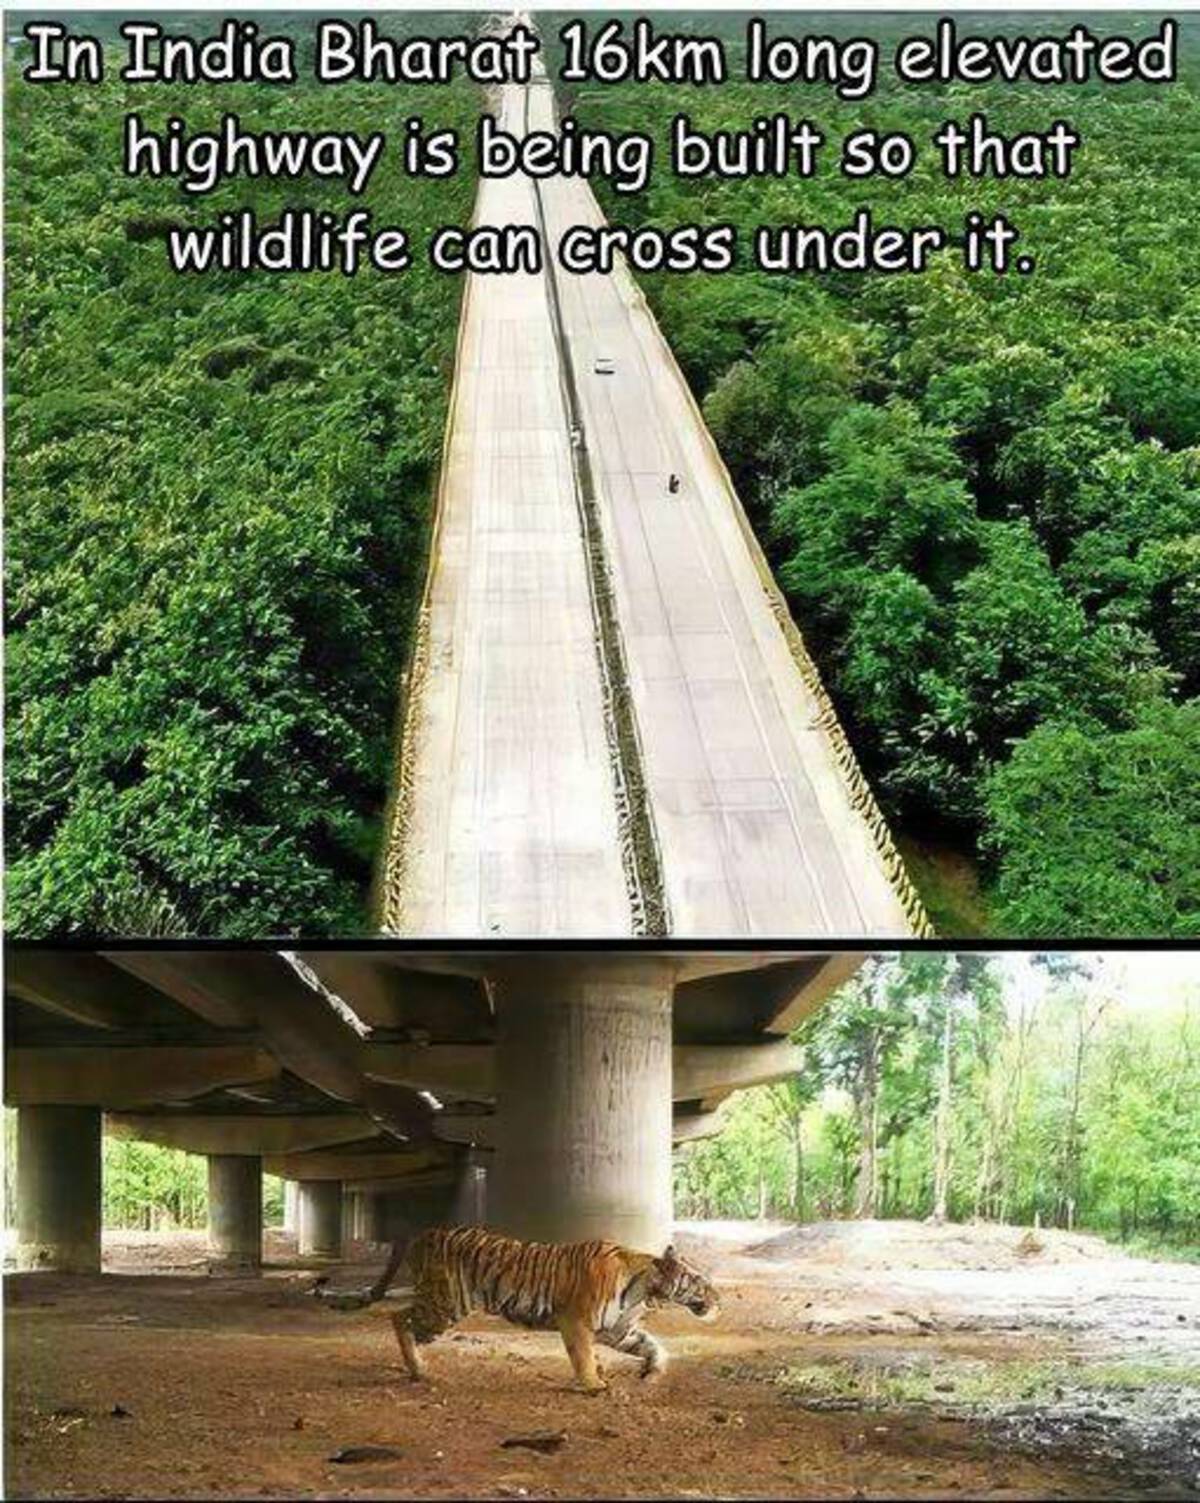 16 km long elevated highway in india - In India Bharat 16km long elevated highway is being built so that wildlife can cross under it.